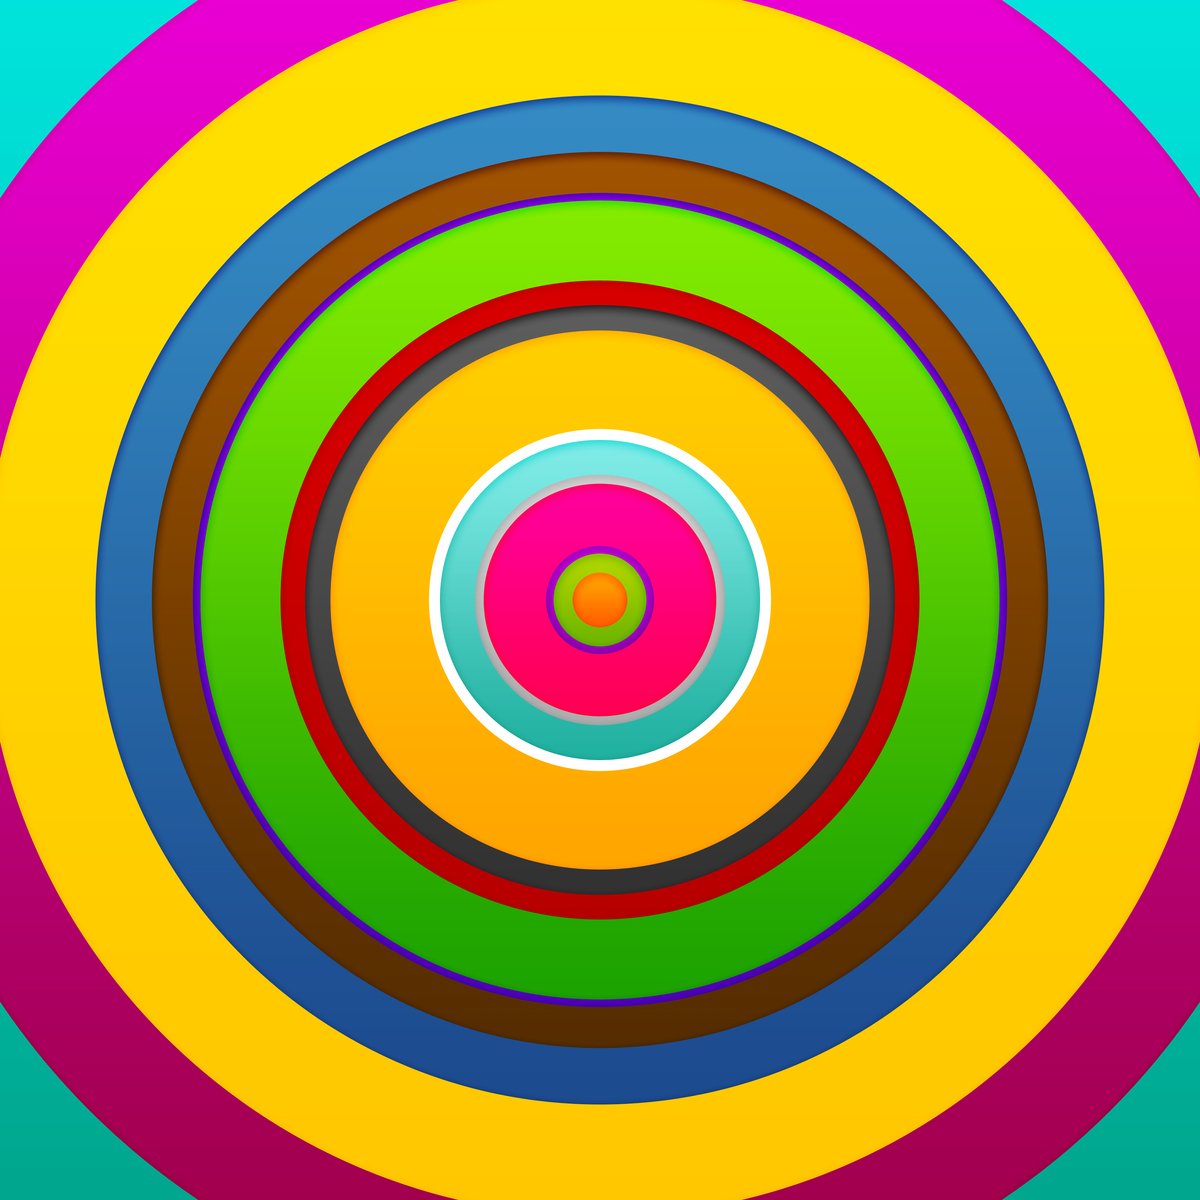 multi colored circles are arranged in the middle of the image